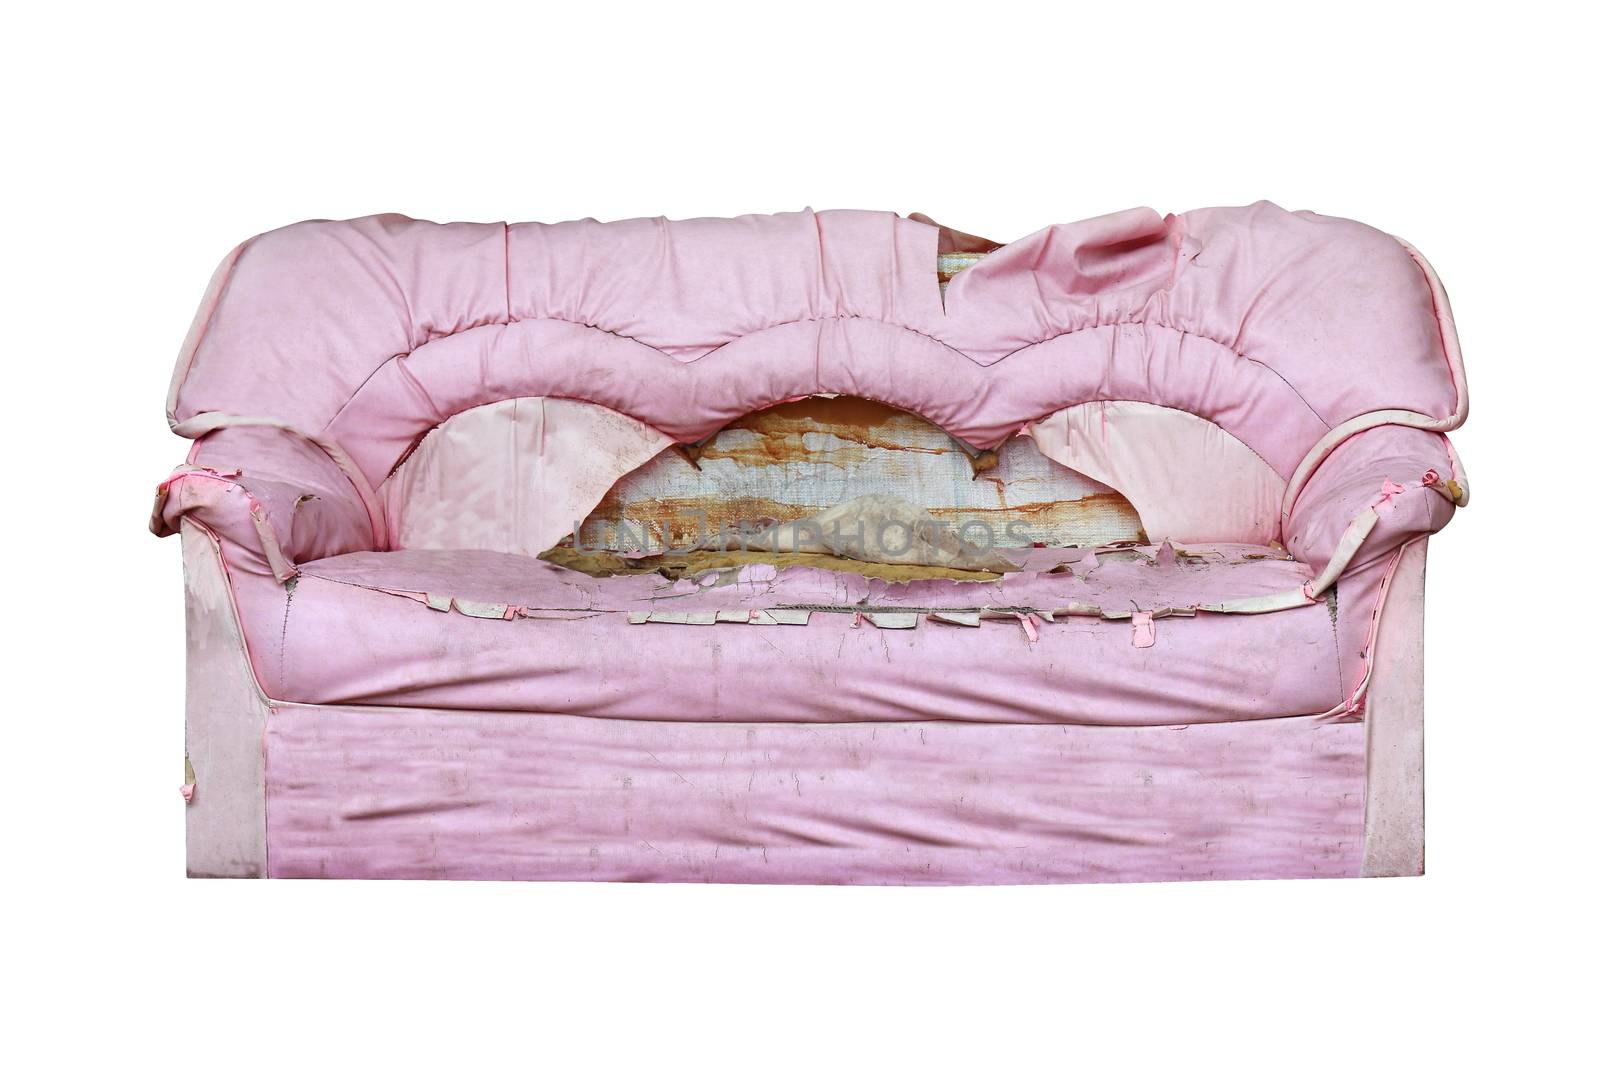 Sofa, Sofa pink old, Sofa dirty isolated on white background